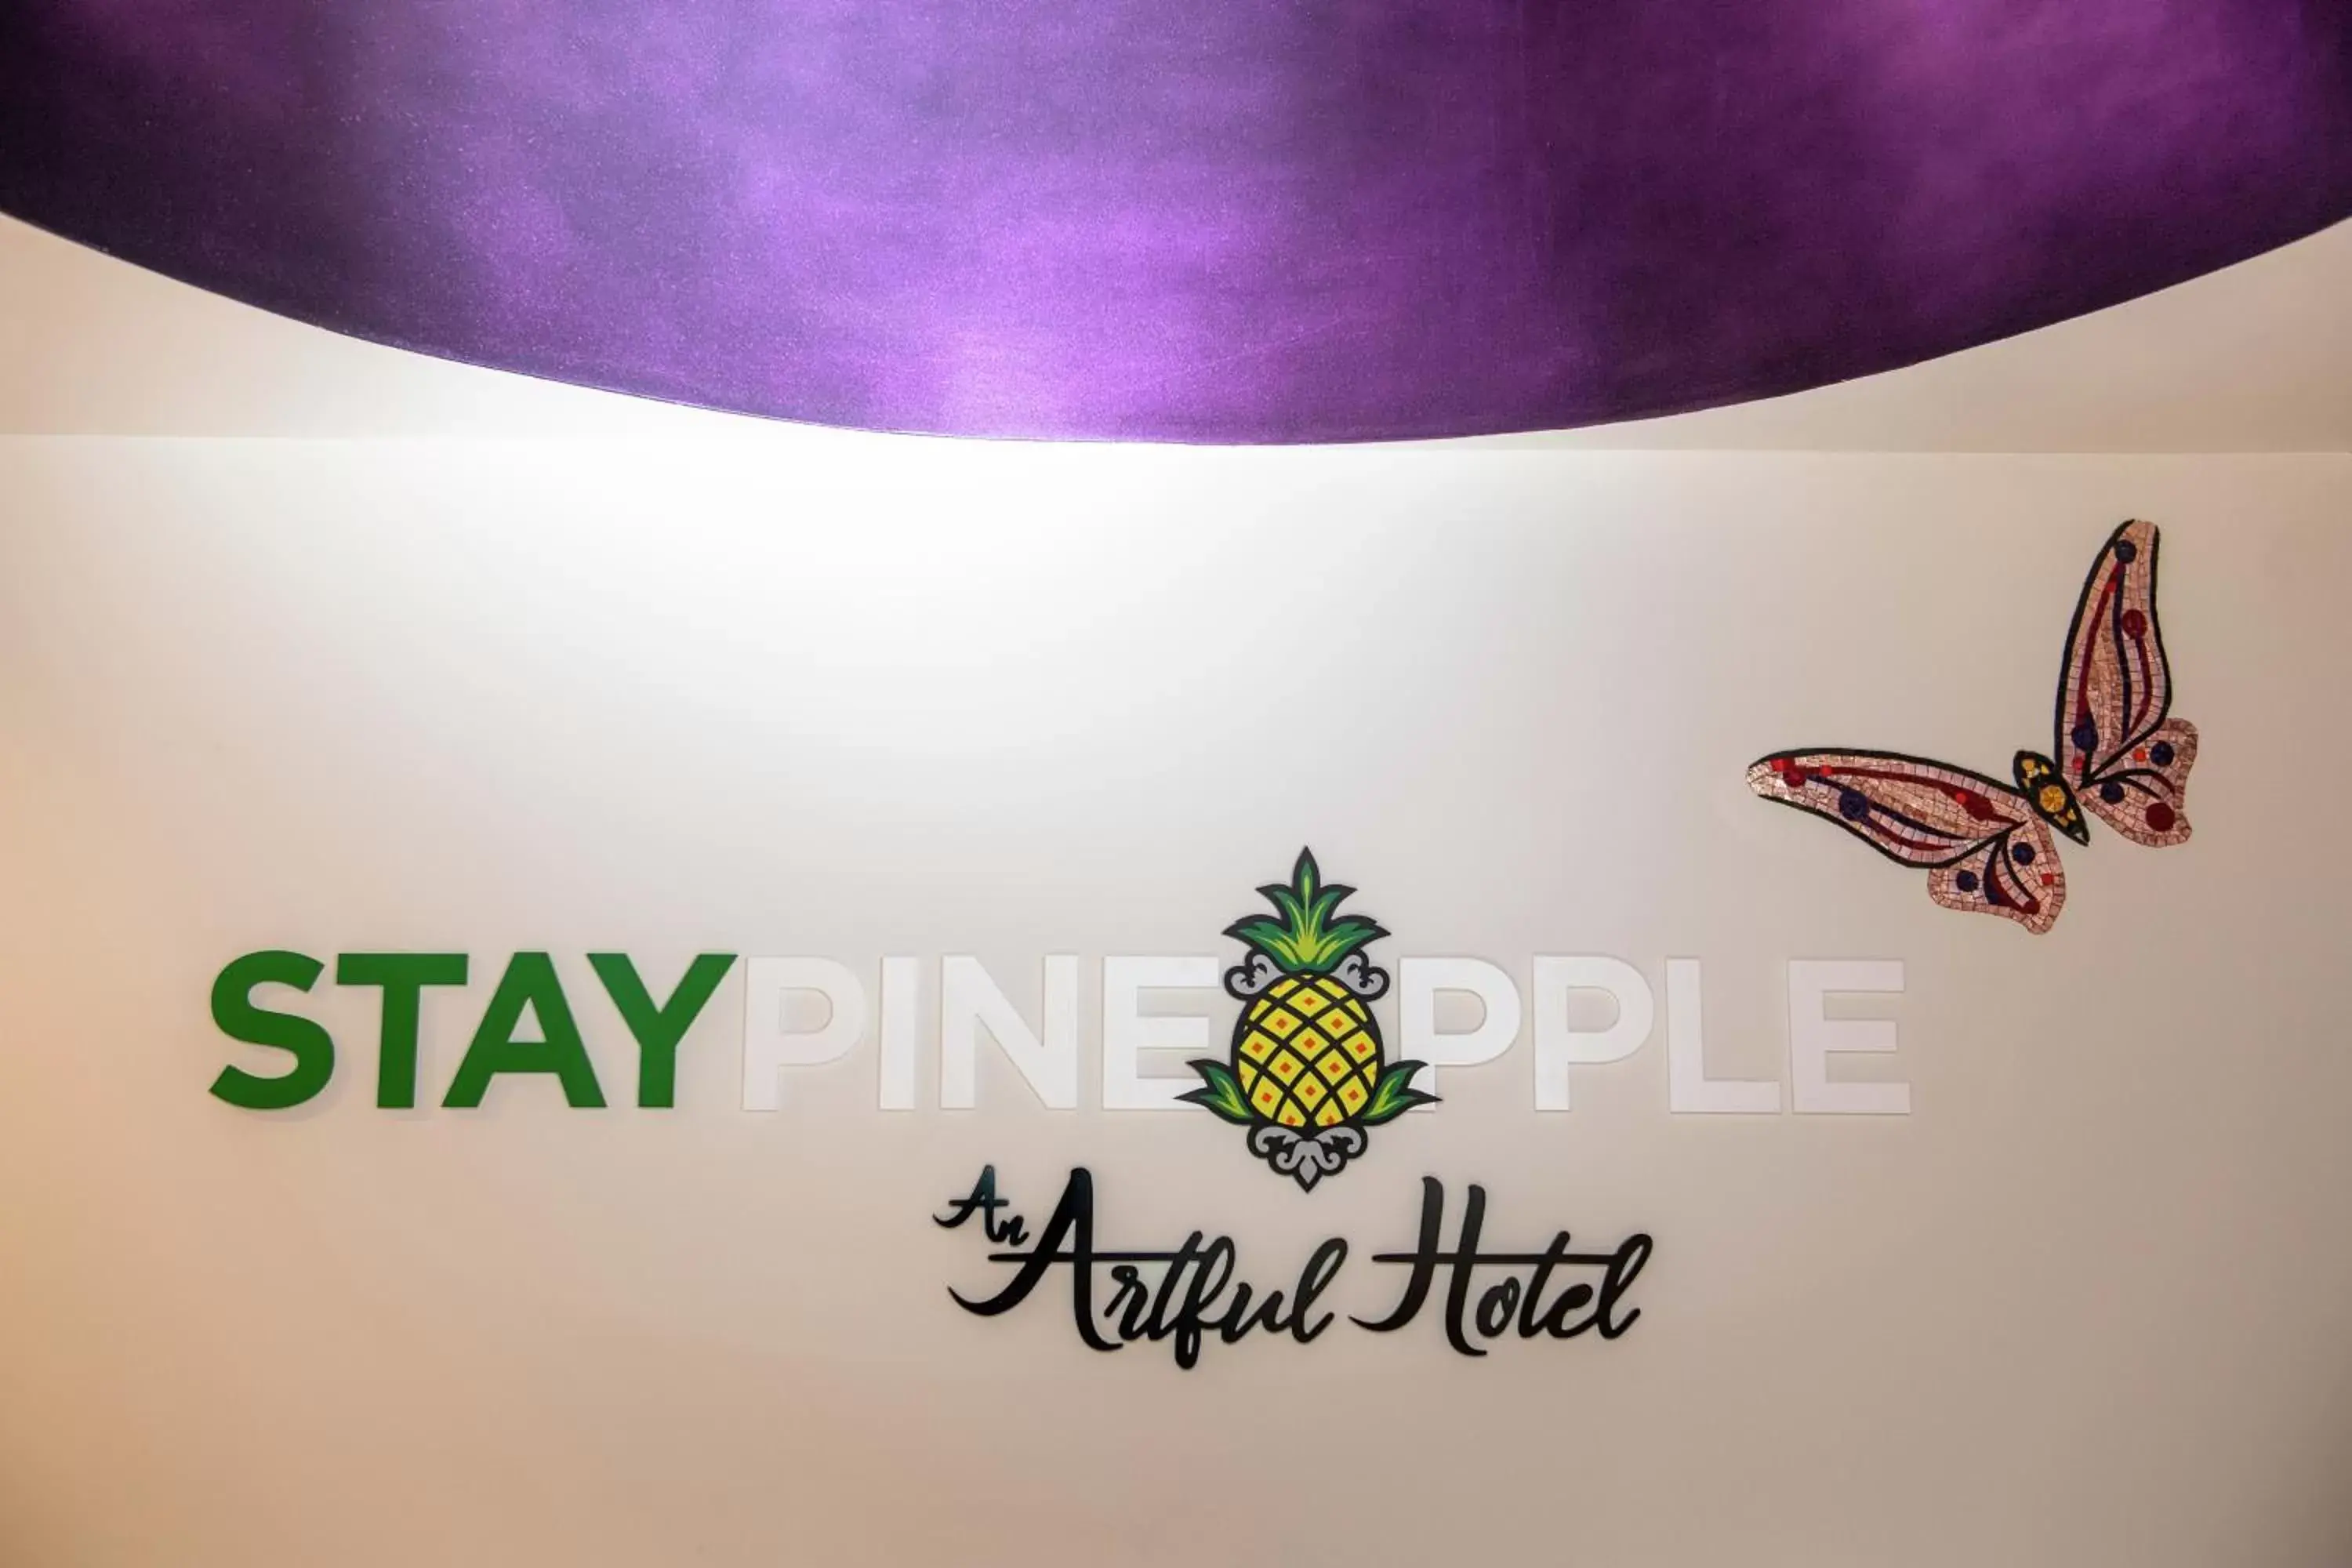 Area and facilities, Property Logo/Sign in Staypineapple, An Artful Hotel, Midtown New York